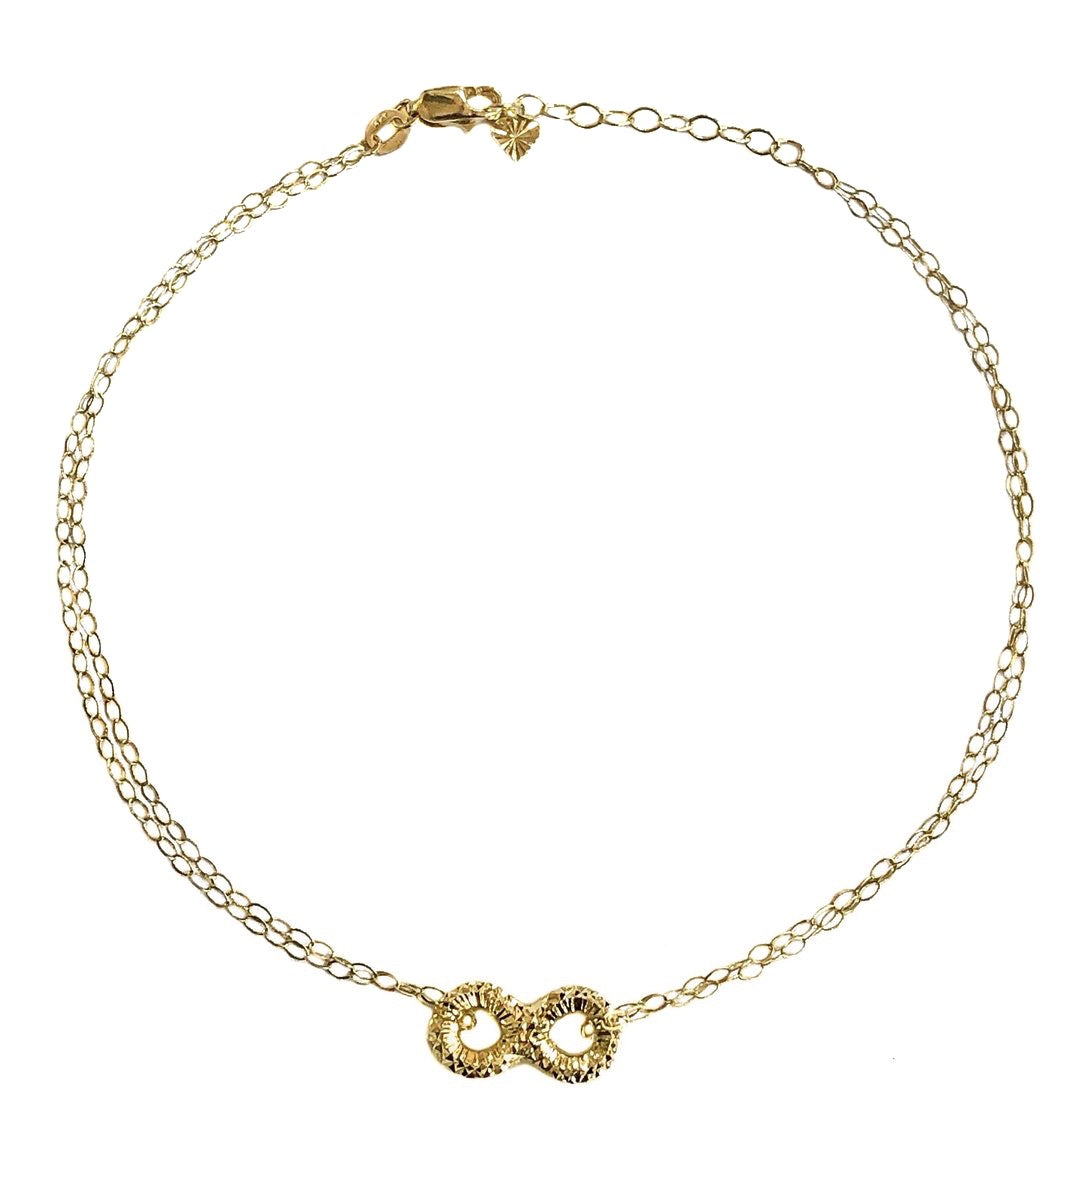 14K YELLOW GOLD INFINITY DOUBLE CHAIN ANKLET